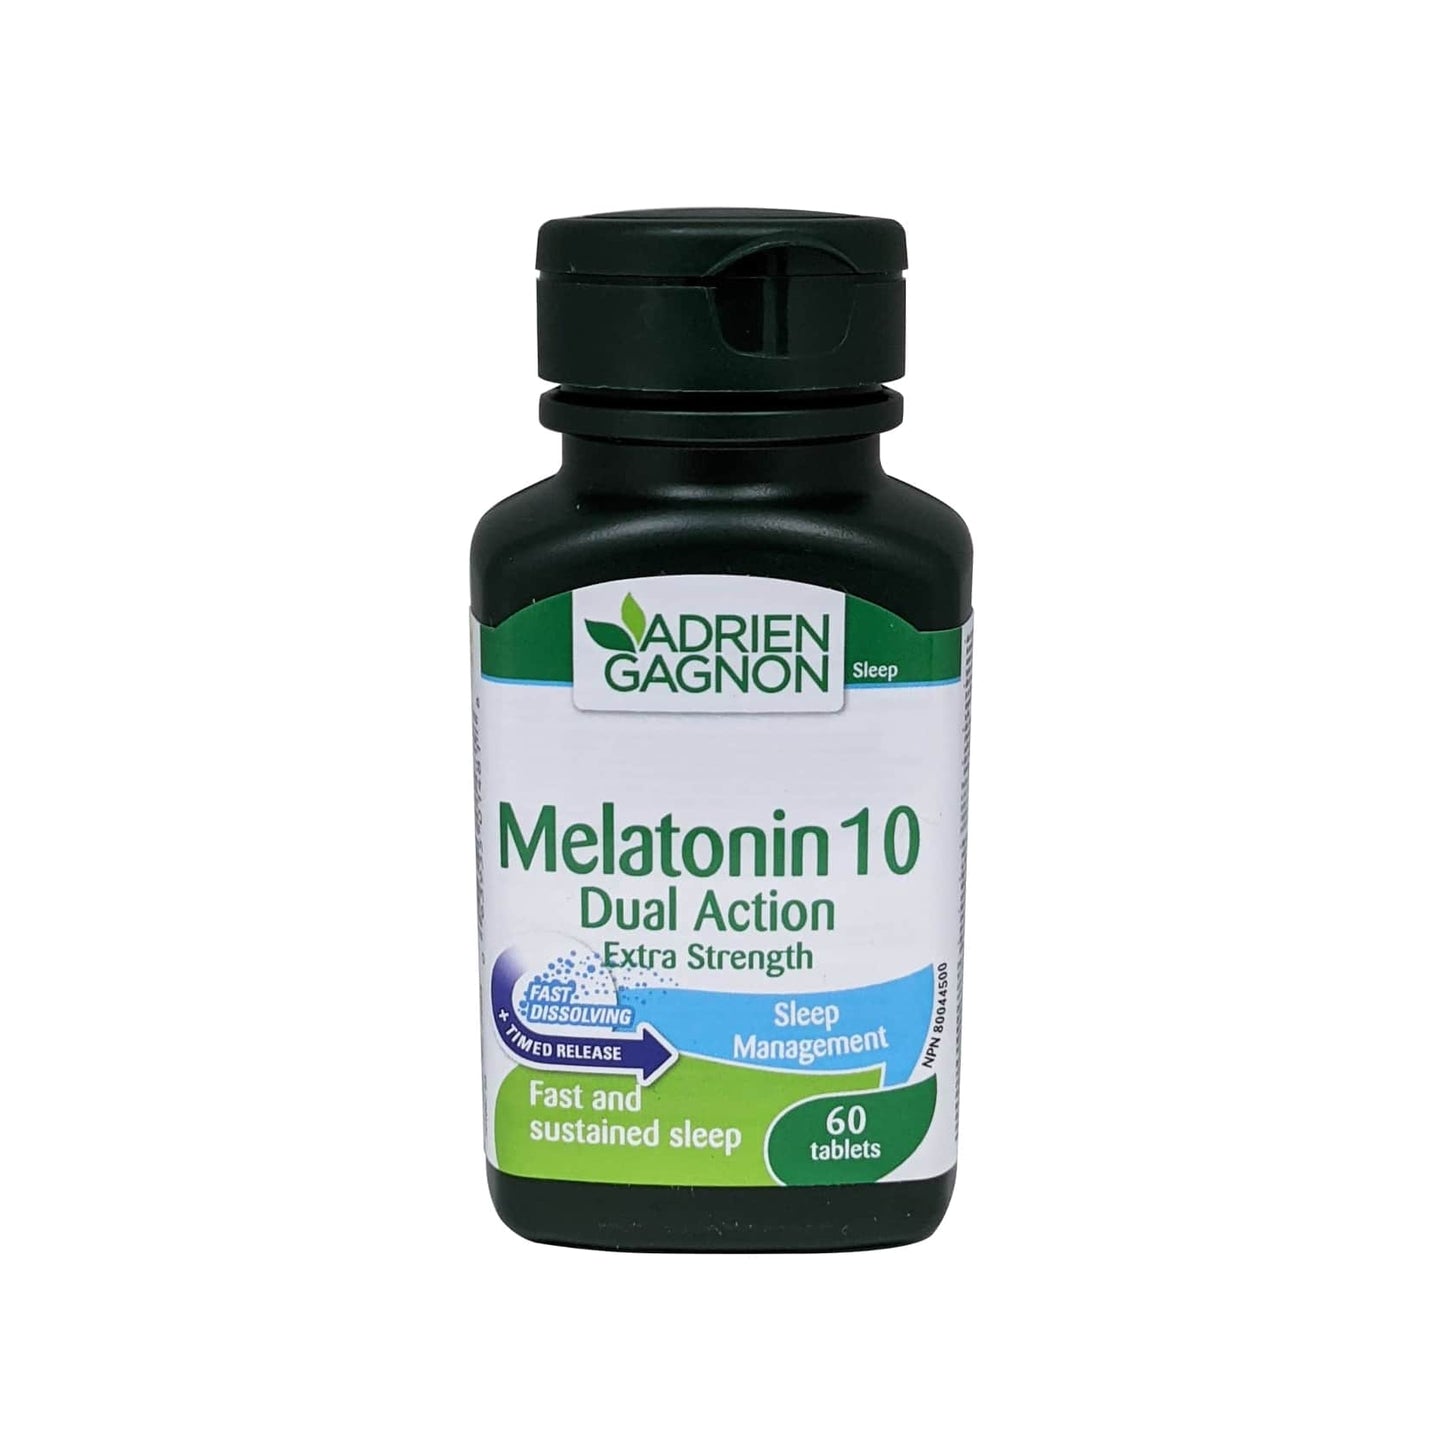 English product label for Adrien Gagnon Melatonin 10 Dual Action Extra Strength